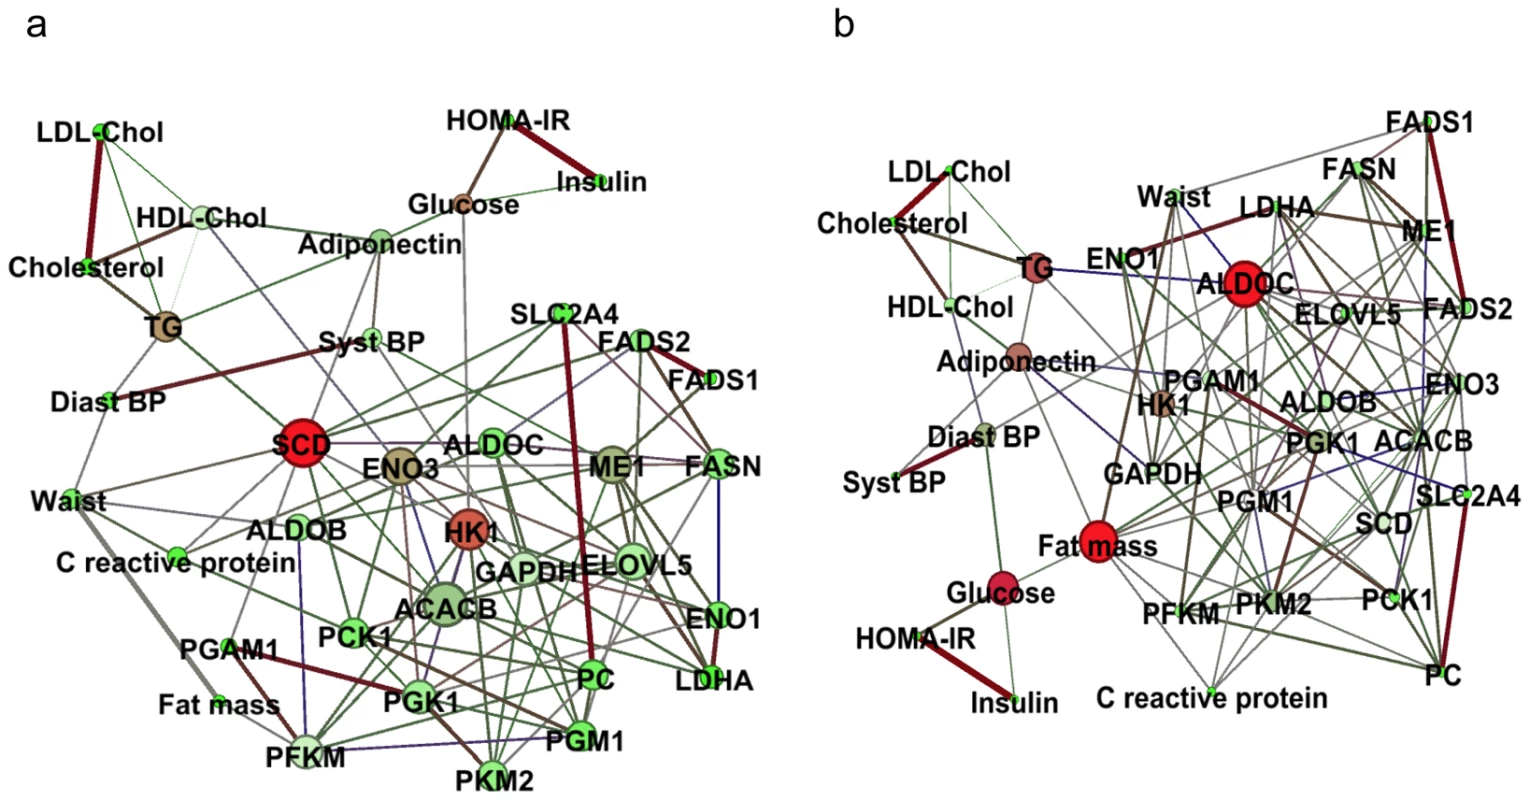 Dependency networks and dietary intervention.